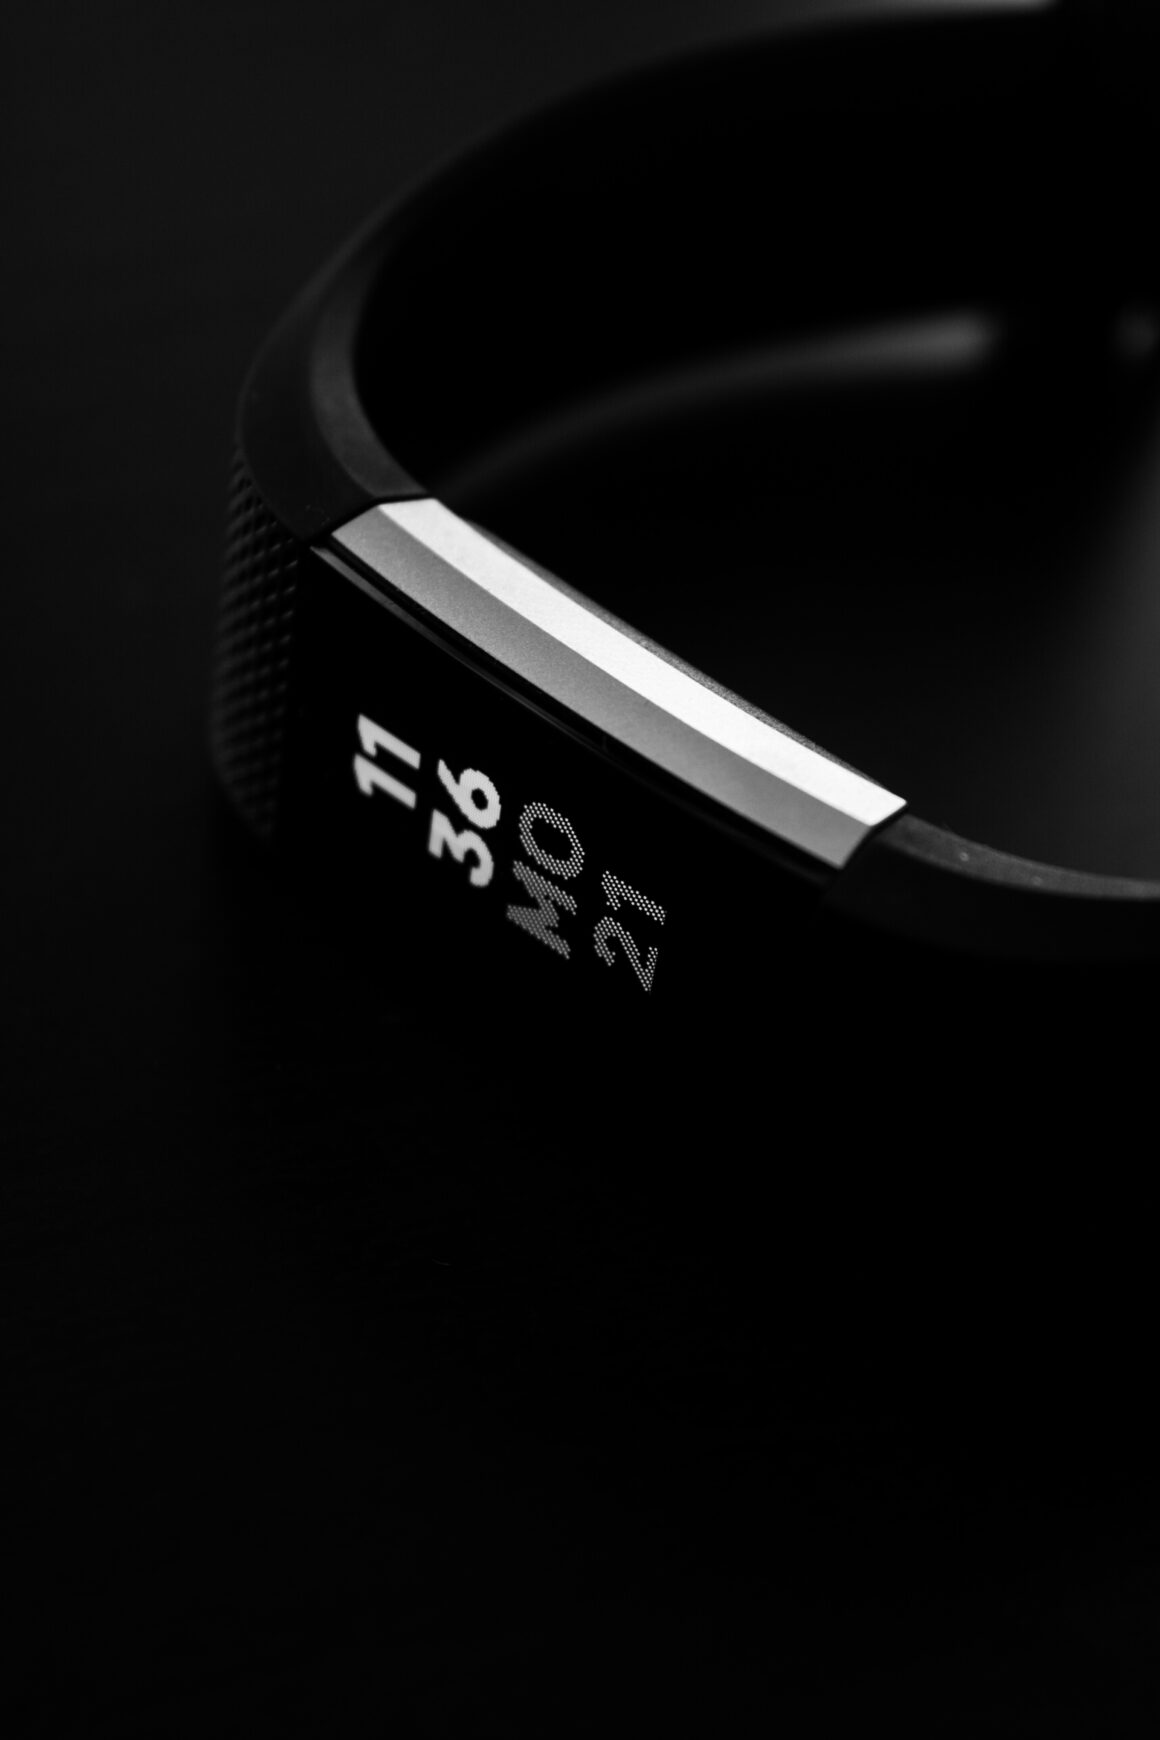 Fitbit Watch on Black Background